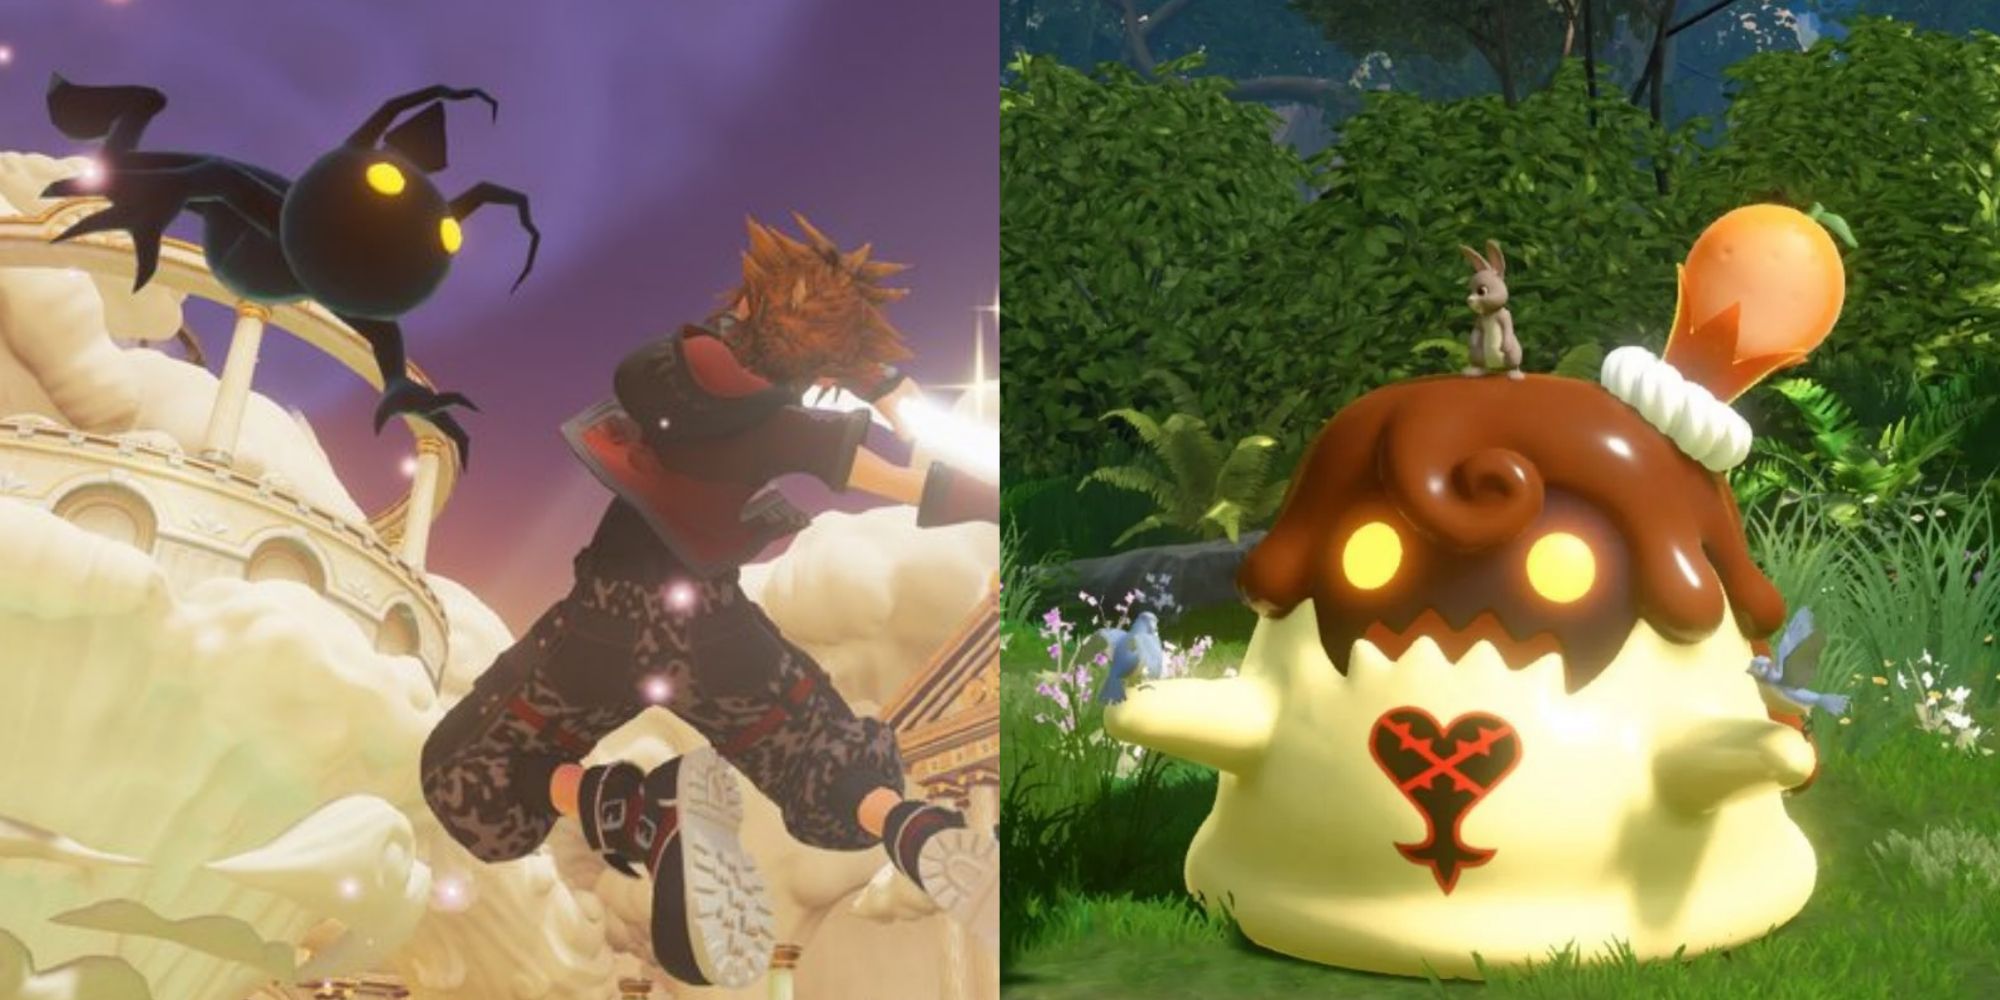 Split image screenshots of Sora attacking a Shadow Heartless and a Flan Heartless in Kingdom Hearts 3.